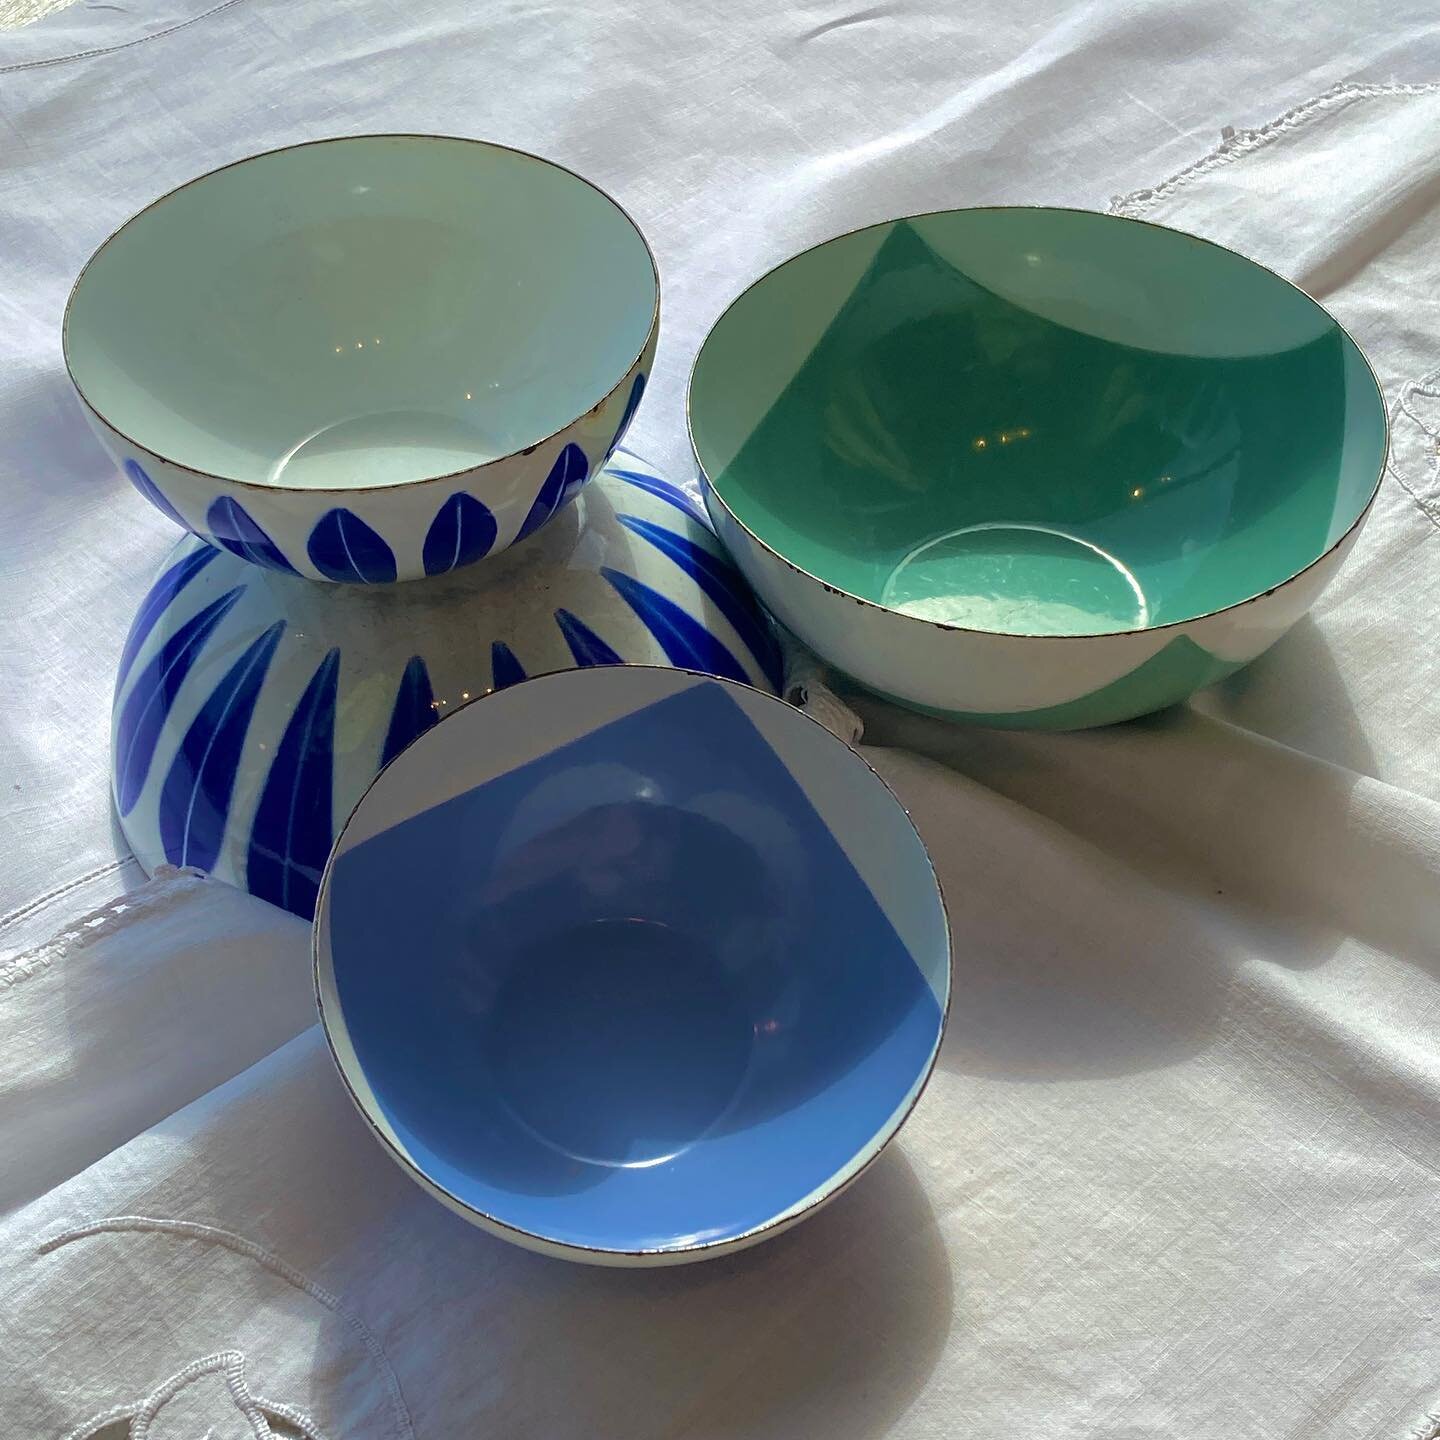 Come browse our lovely collection of Catherineholm enamel bowls and cookware!
.
.
.
#catherineholm #vintage #vintagestyle #vintagekitchen #vintagecookware #vintageenamel #vintageenamelware